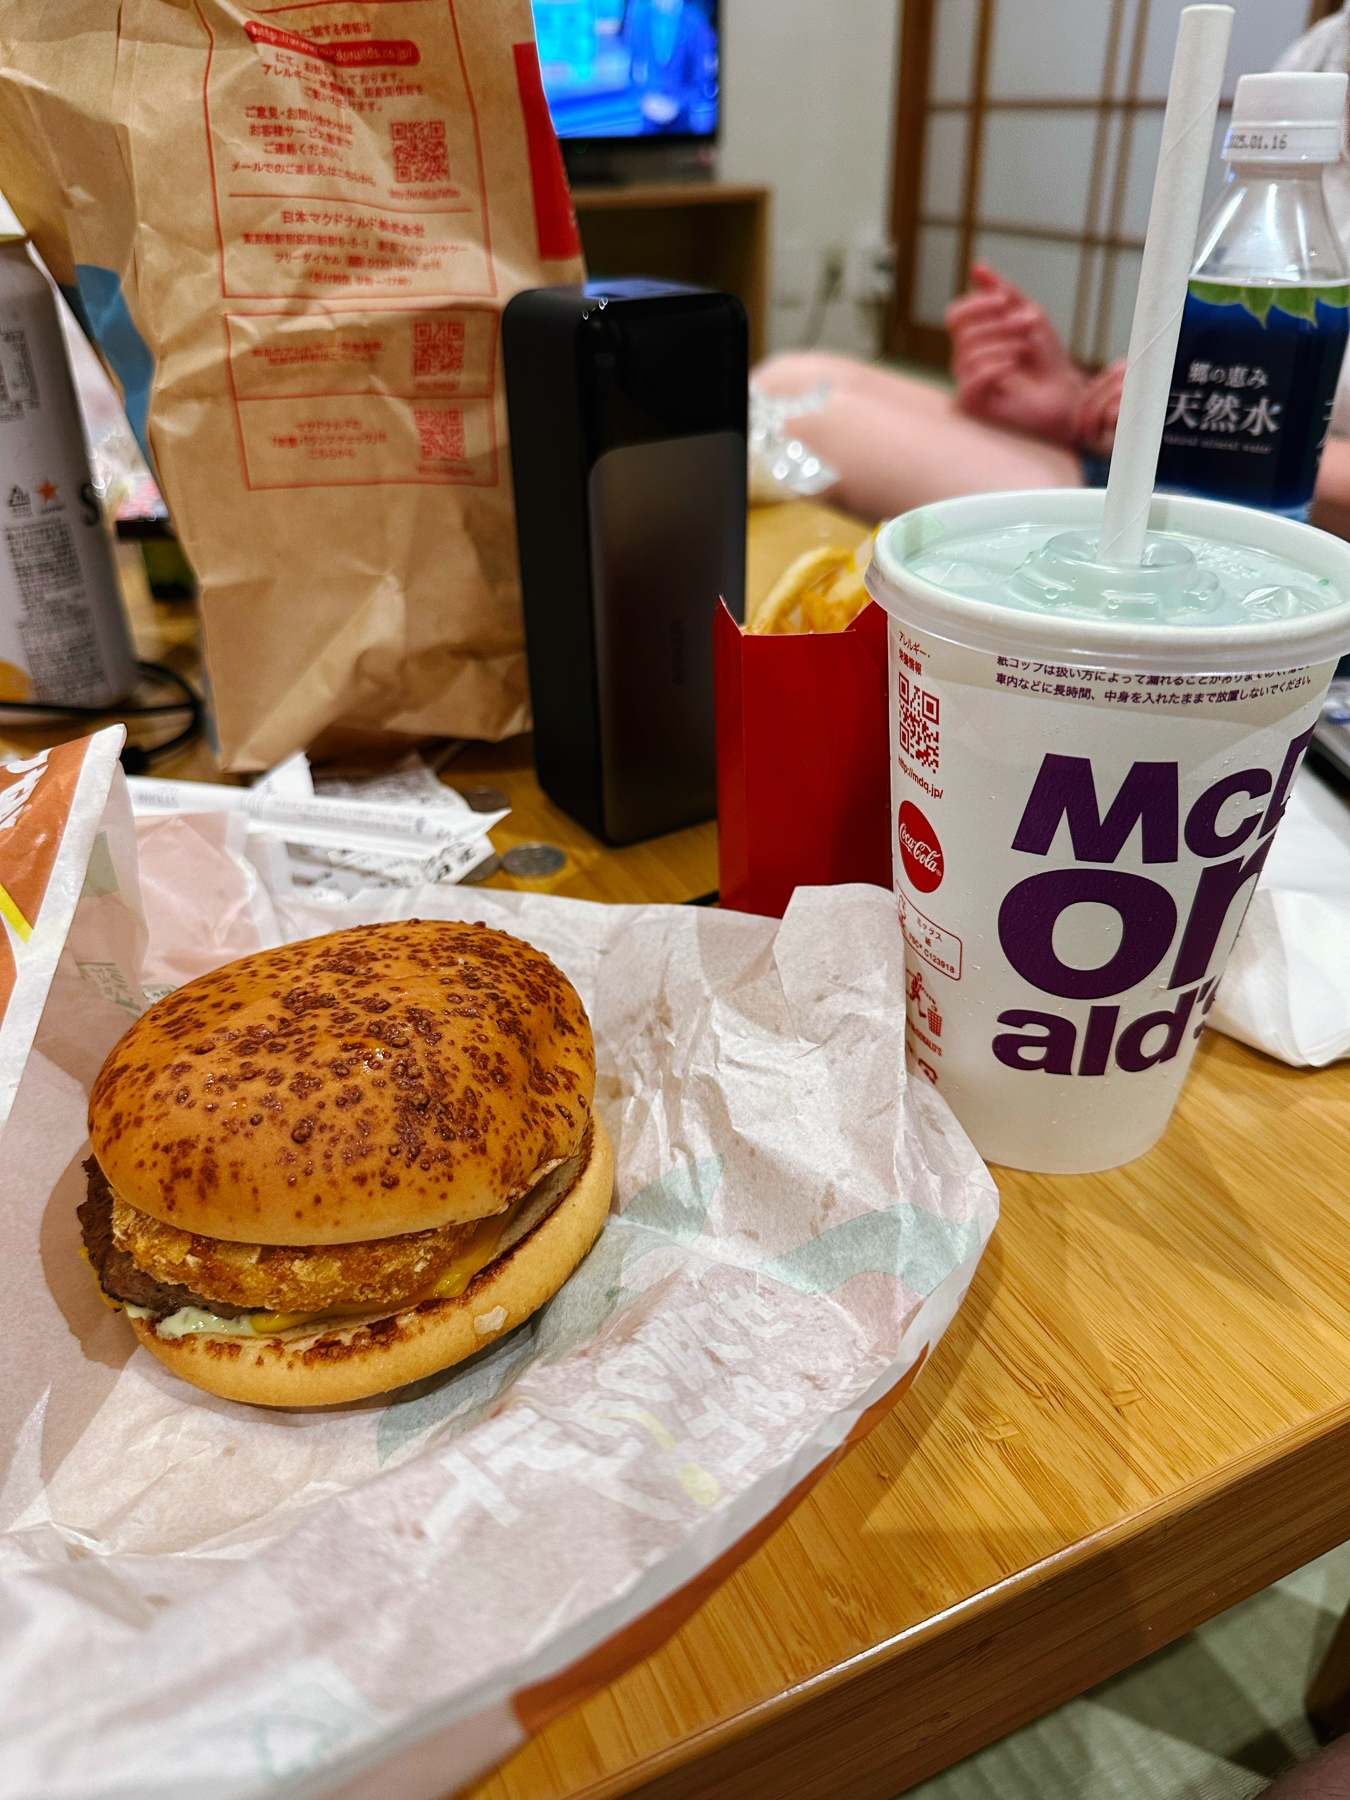 A fast food meal on a wooden table, including a burger, a drink with a straw, French fries, and various takeout packaging, with a blurred background of a living room.